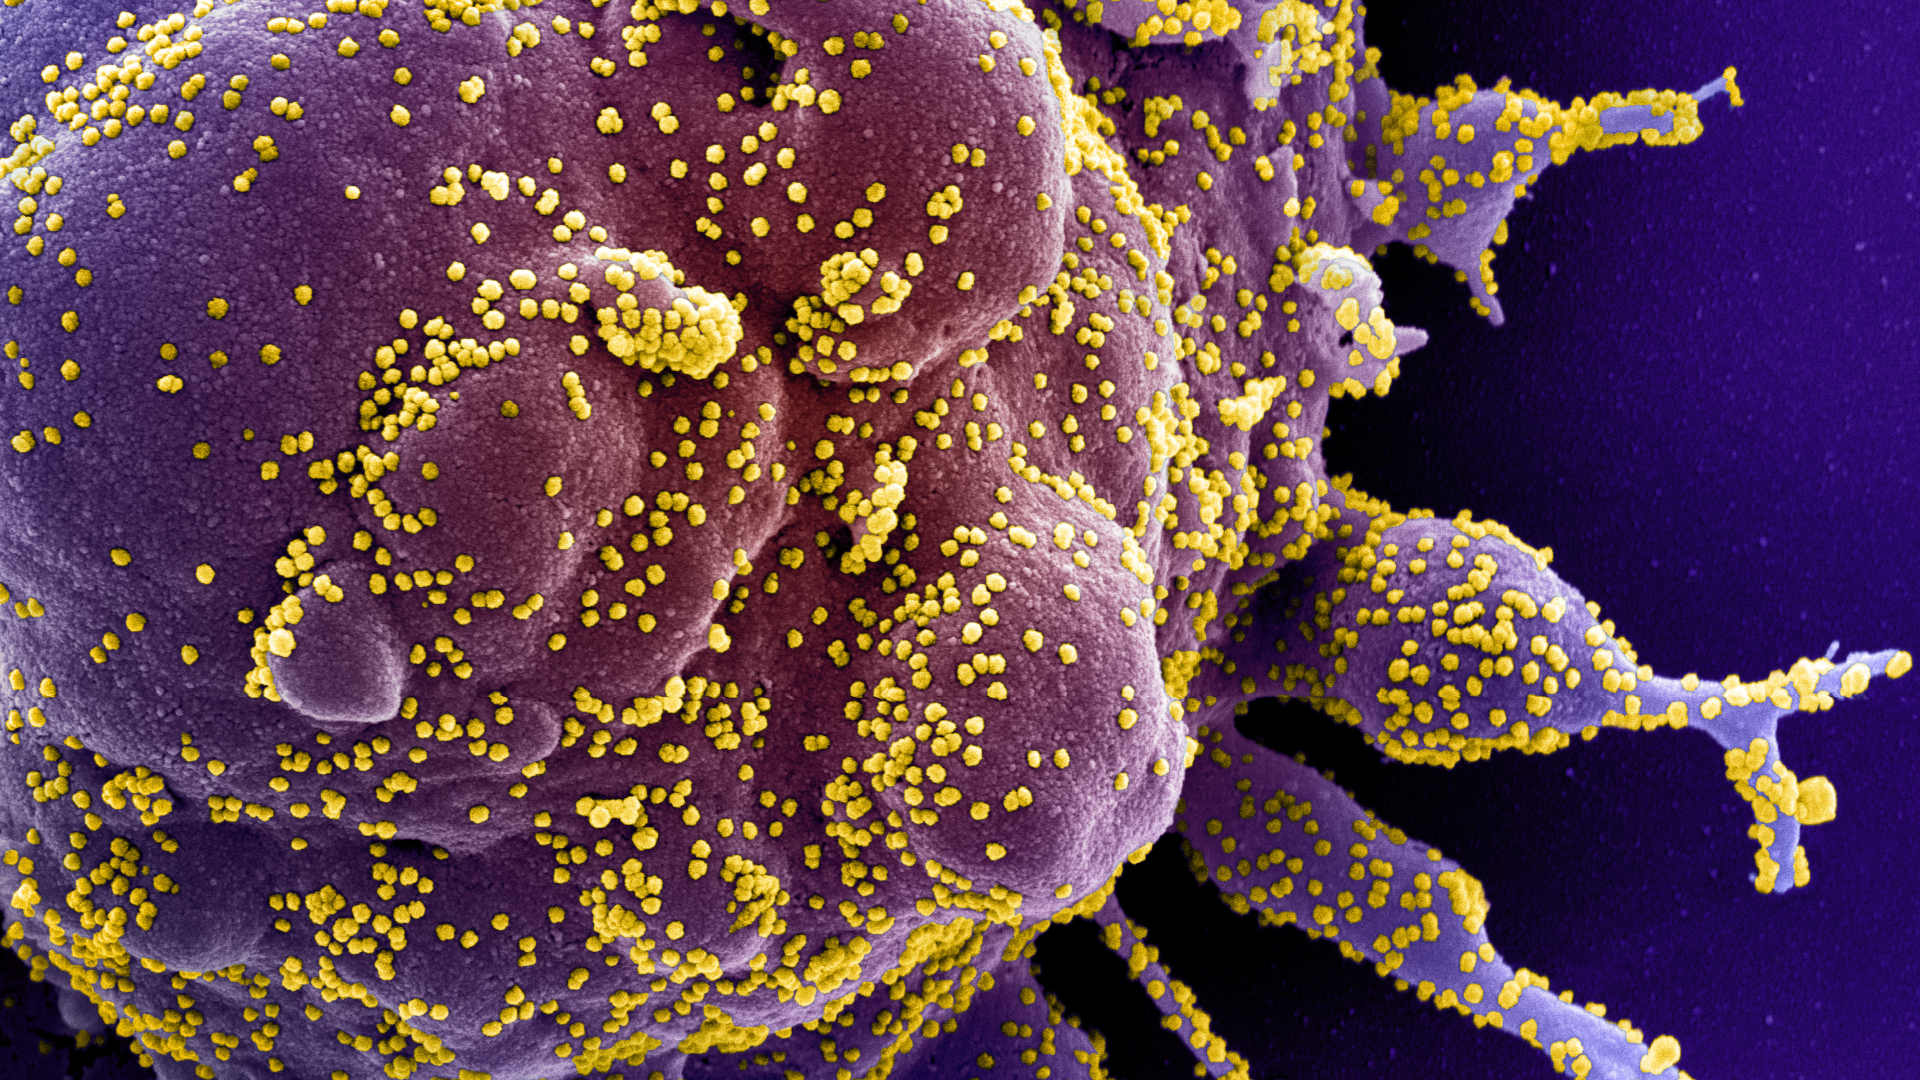 Electron microscope image of a human cell (purple) heavily infected with SARS-CoV-2 virus particles (yellow).